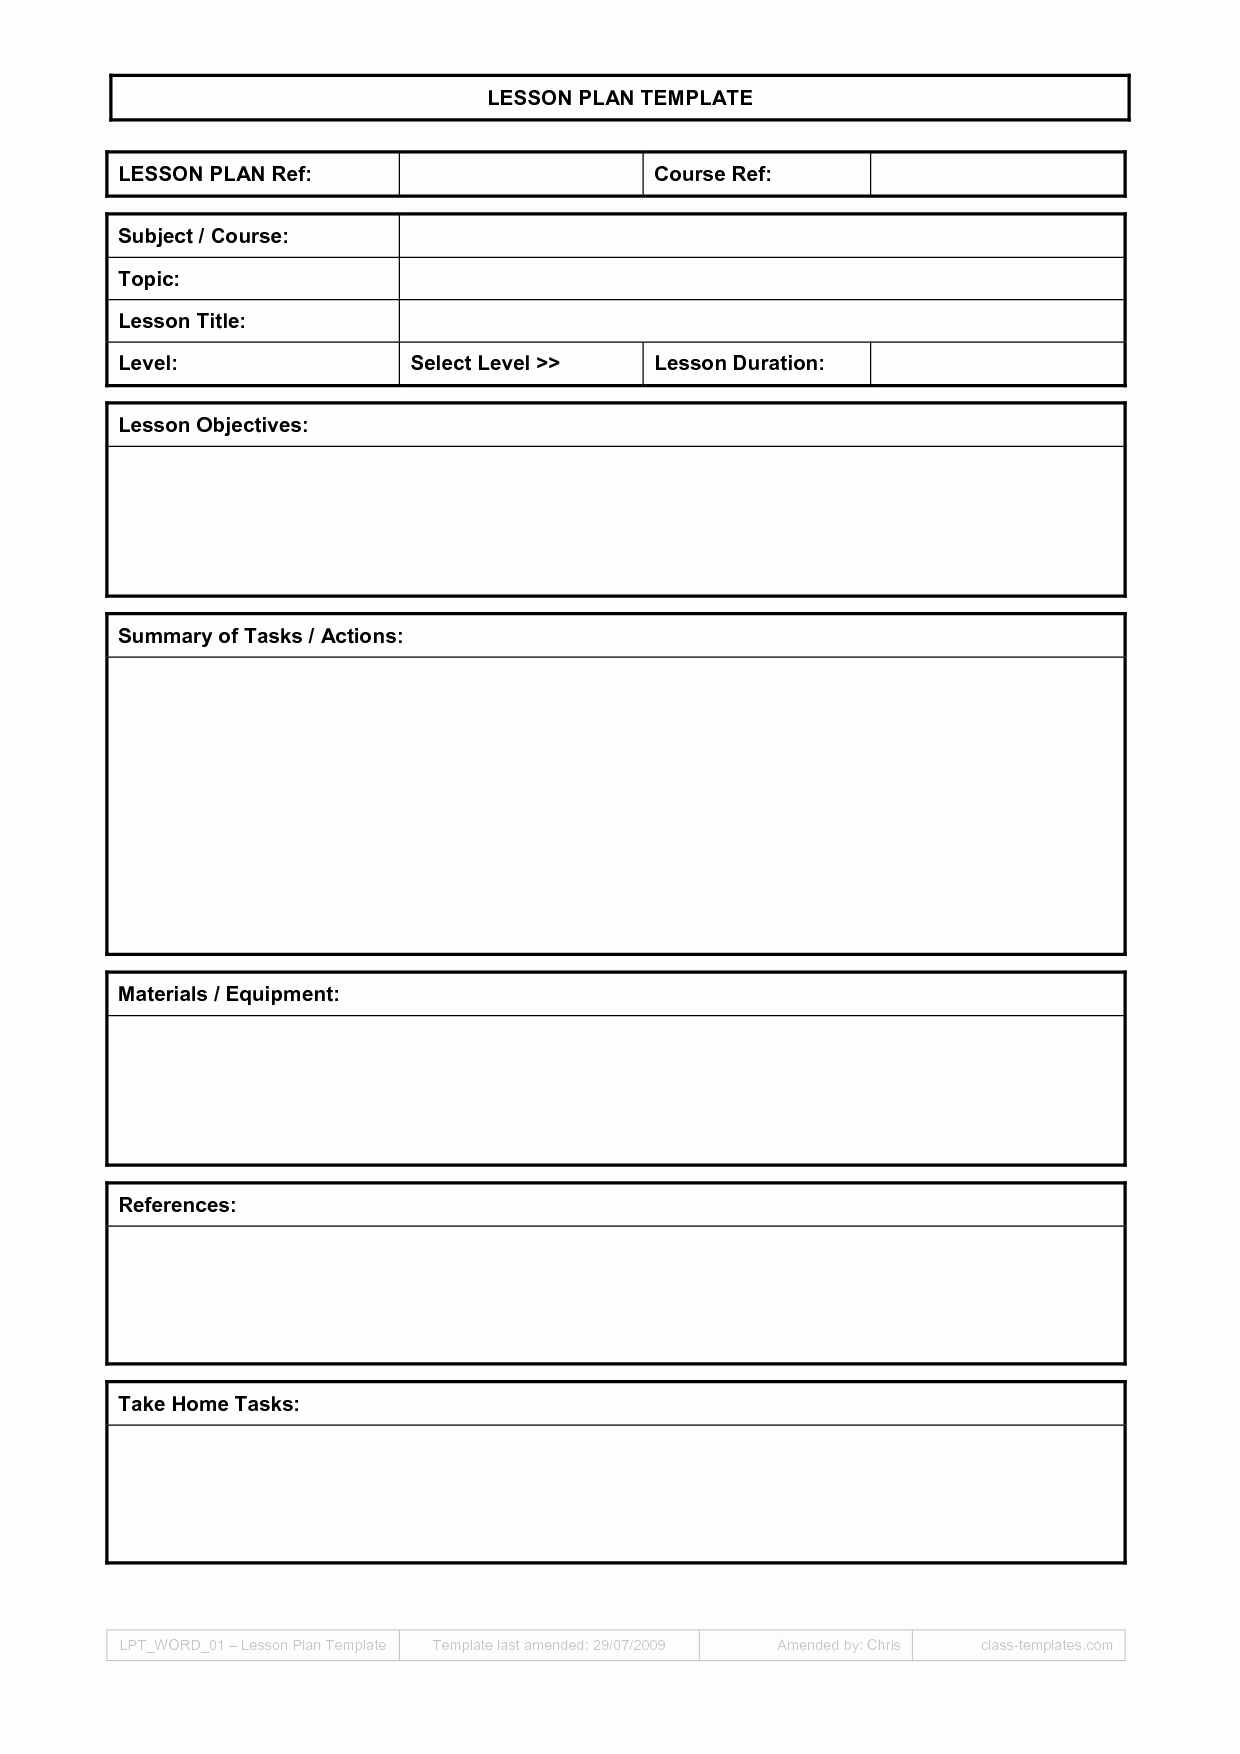 Curriculum Template for Teachers Fresh Lesson Plan Template Free Pic Twiroo